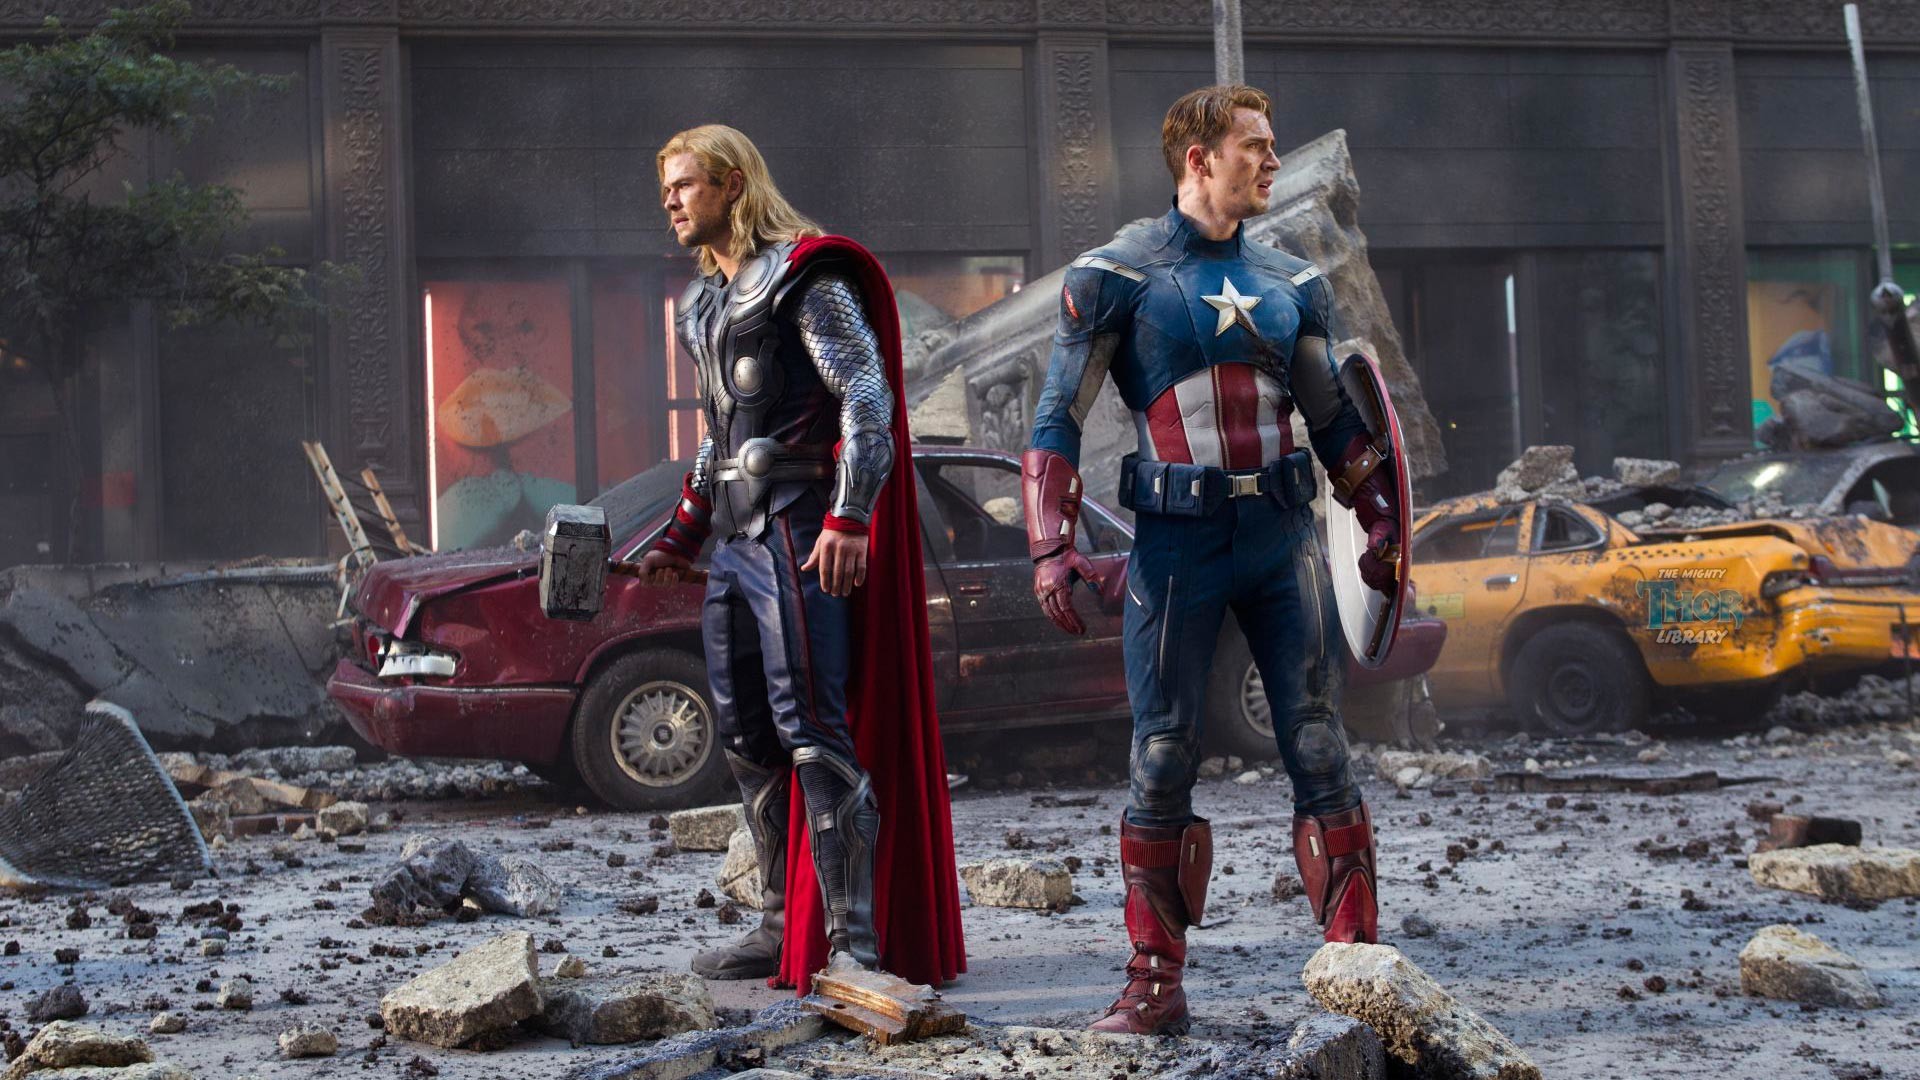 1920x1080 Thor And Captain America In Avengers Movie (1920 X 1080) Wallpaper.  Original Resolution  px